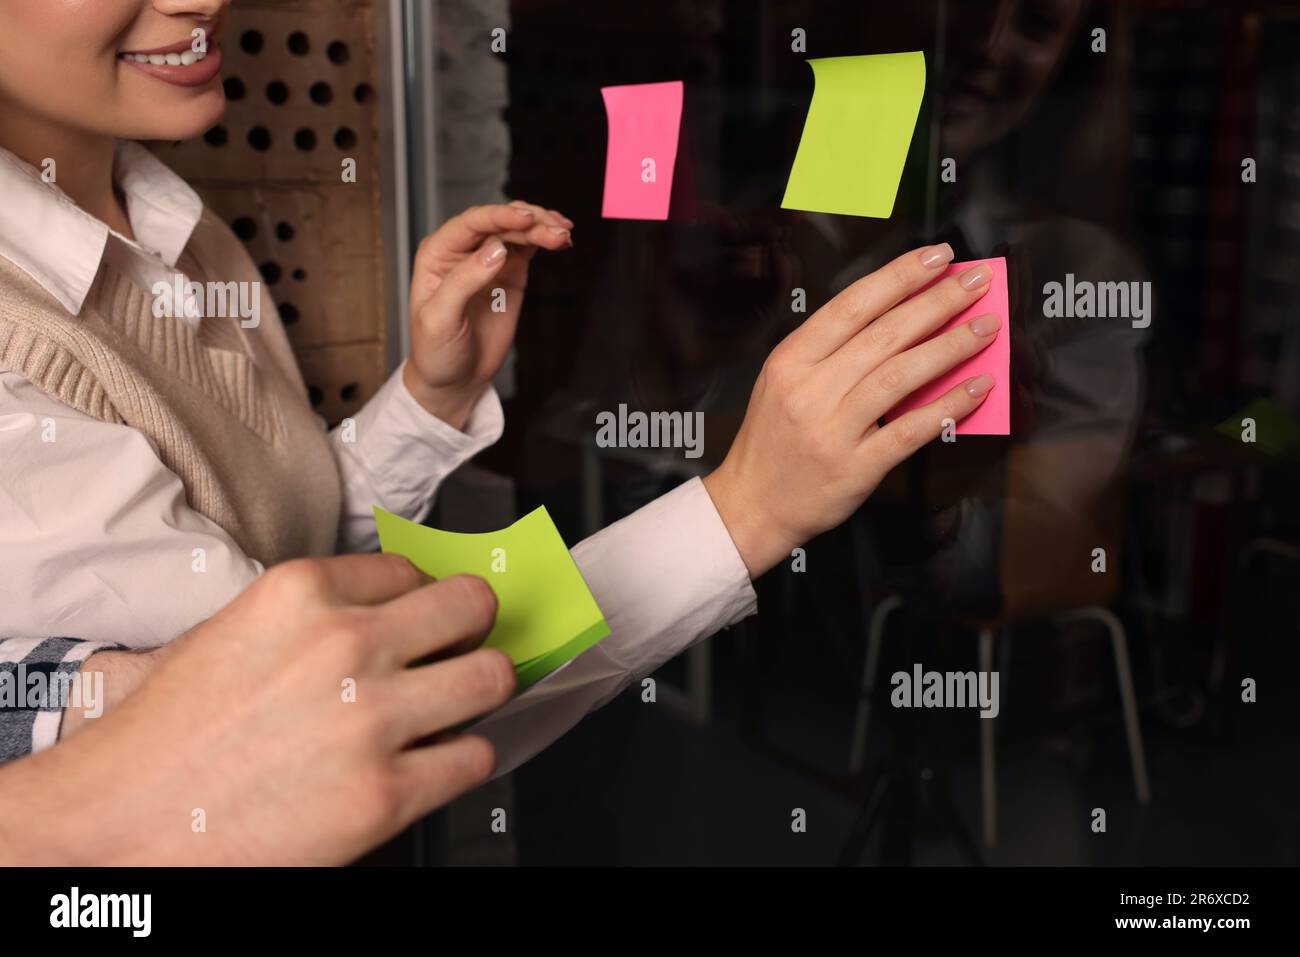 Employees putting colorful sticky notes on glass door in office, closeup. Team work motivation Stock Photo